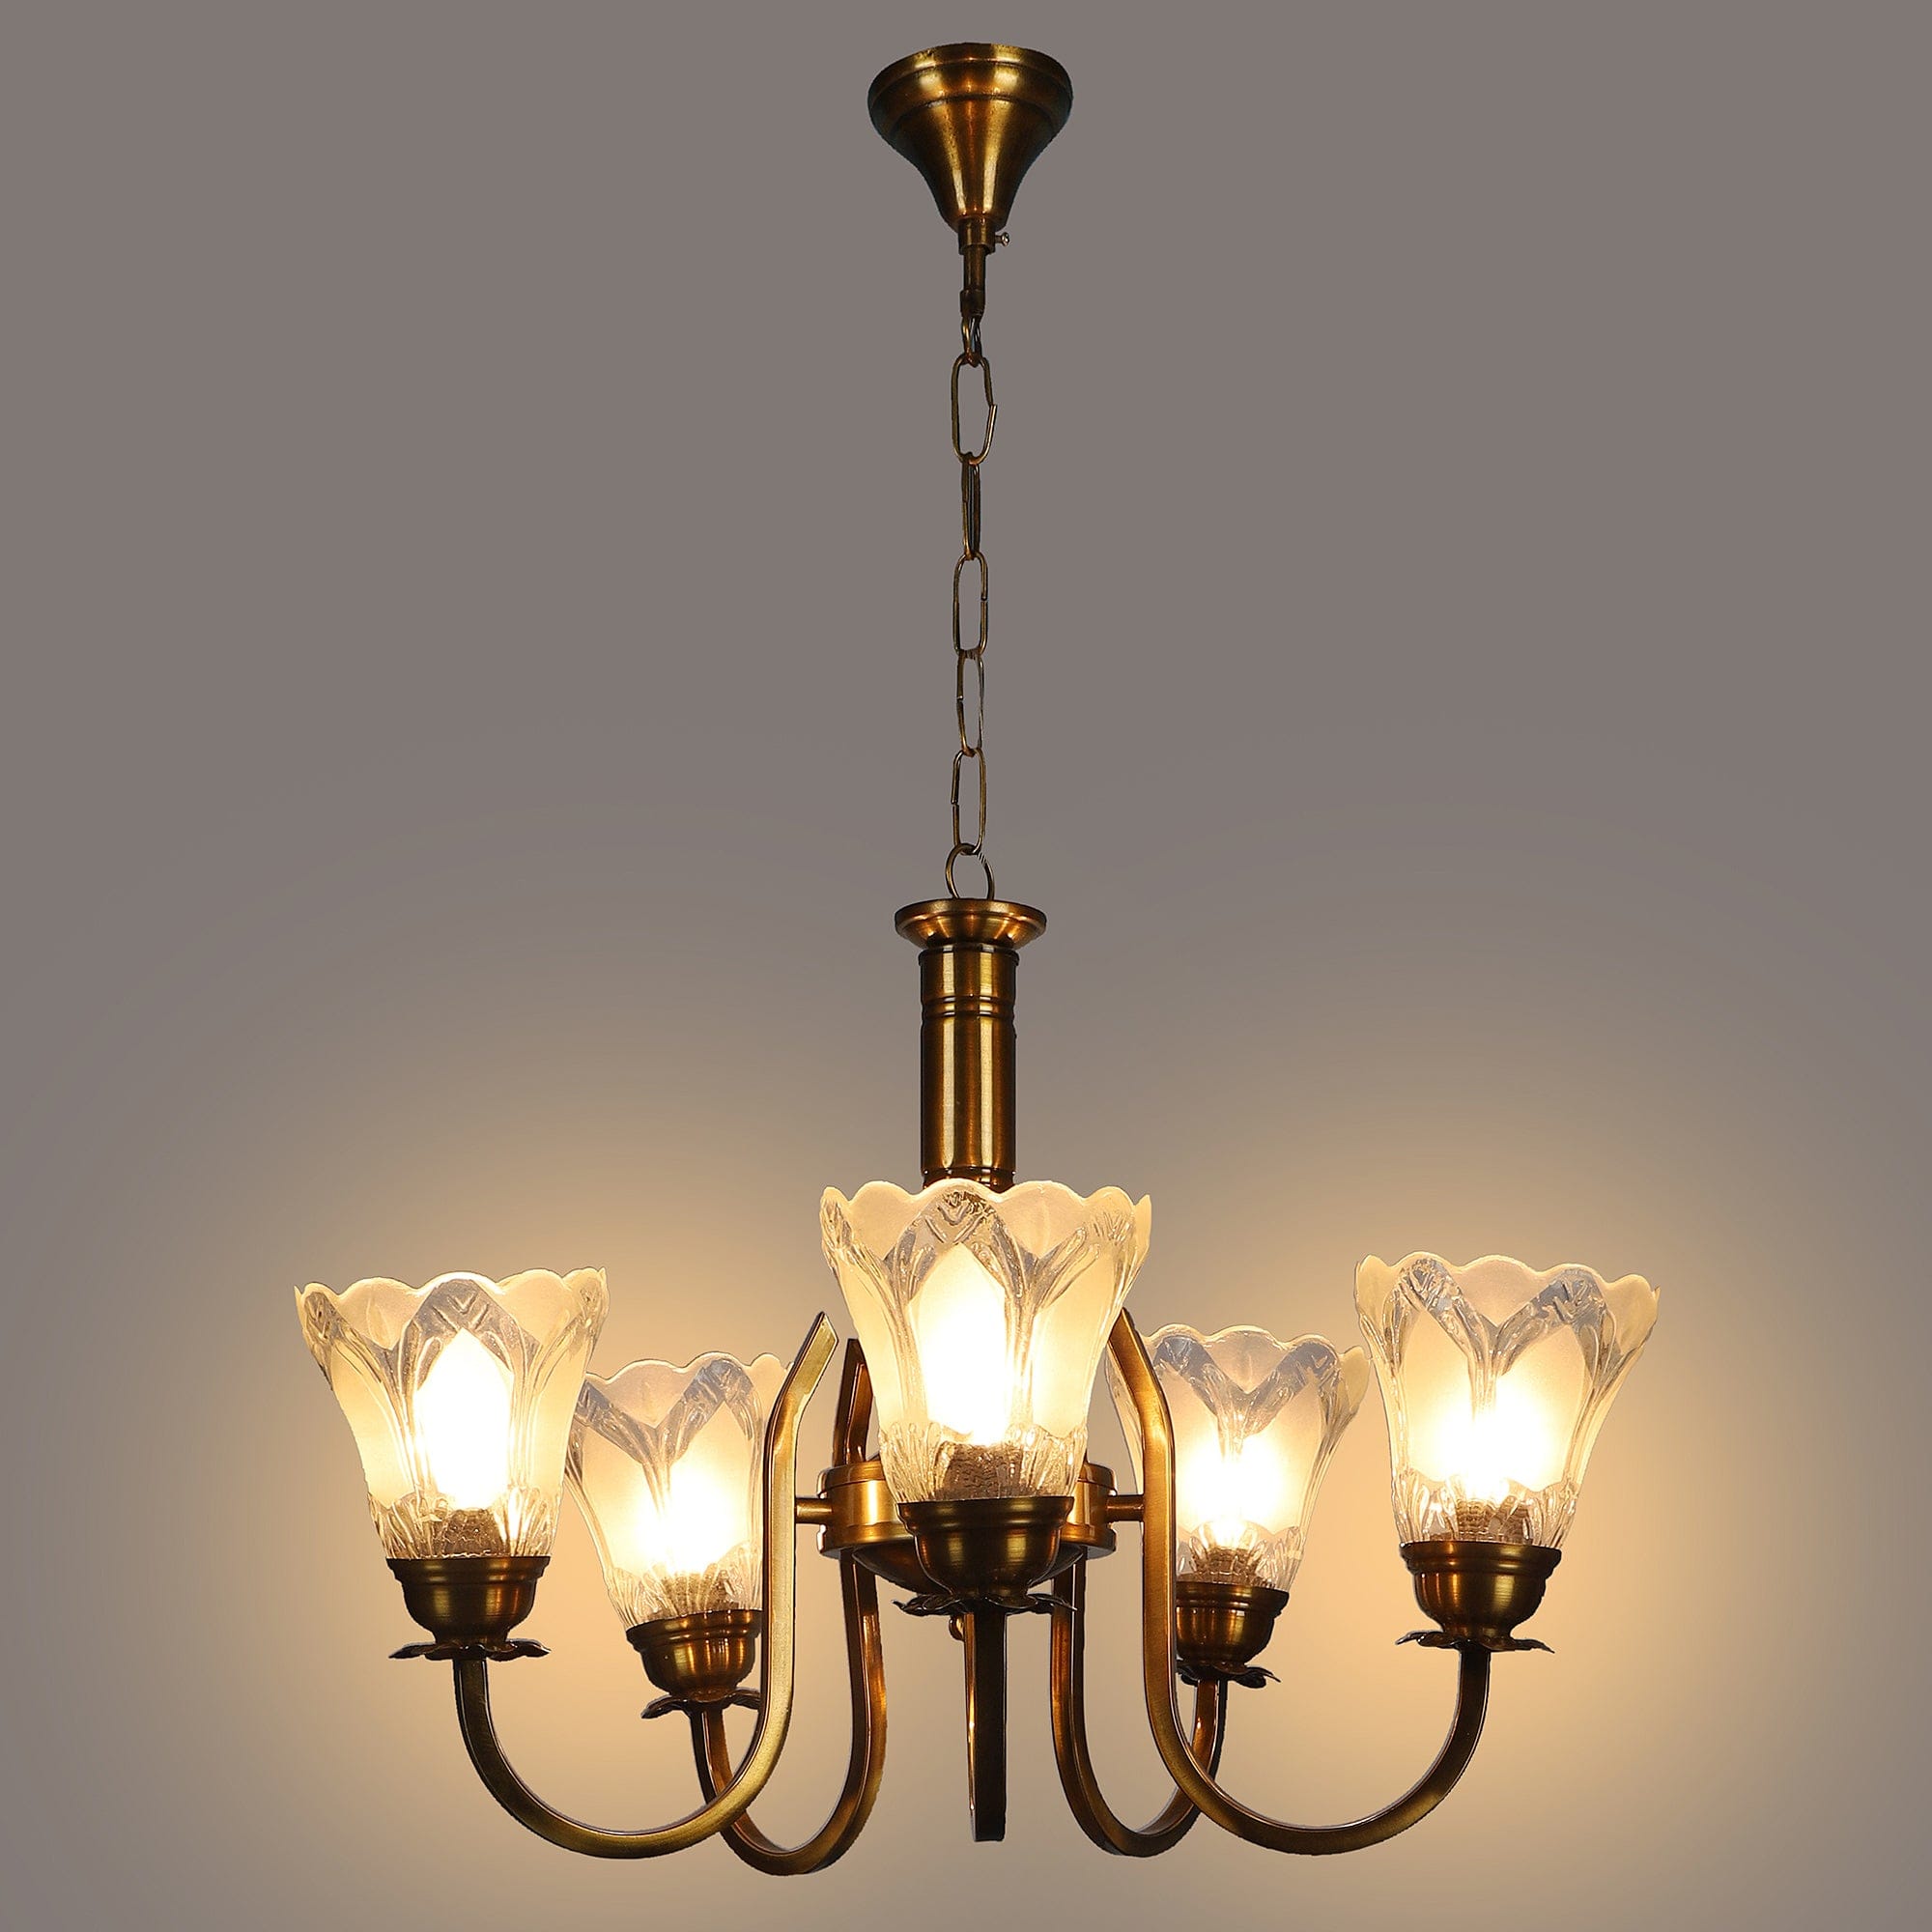 Antique Gold And White  Iron  5 Light Chandelier